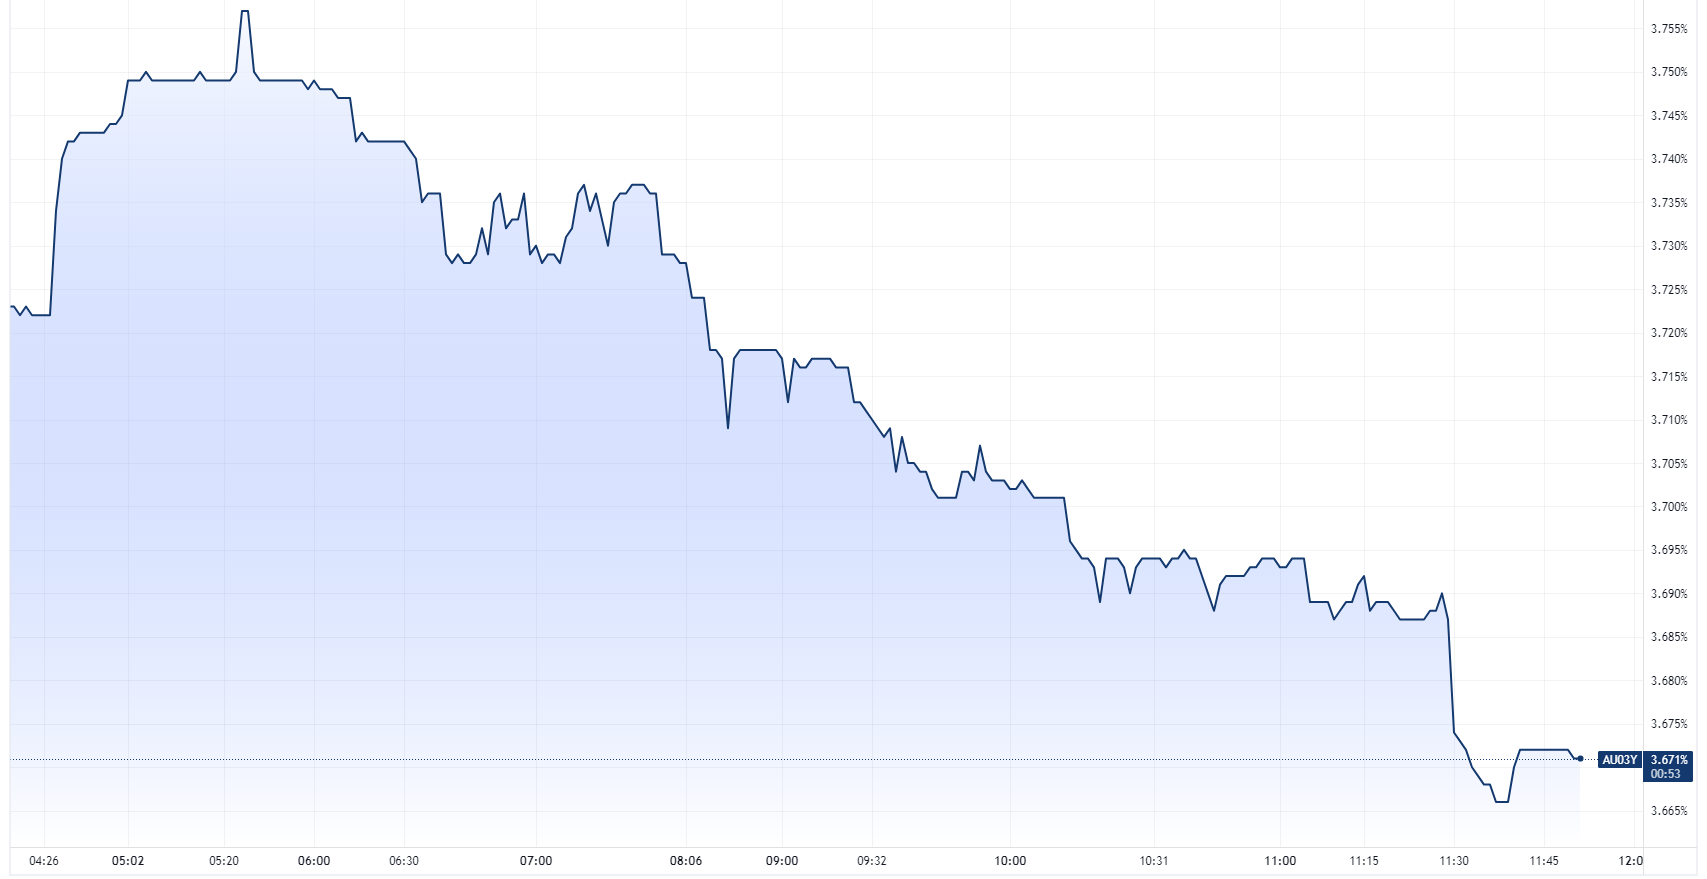 Australia 3-year government yield chart (Source: TradingView)